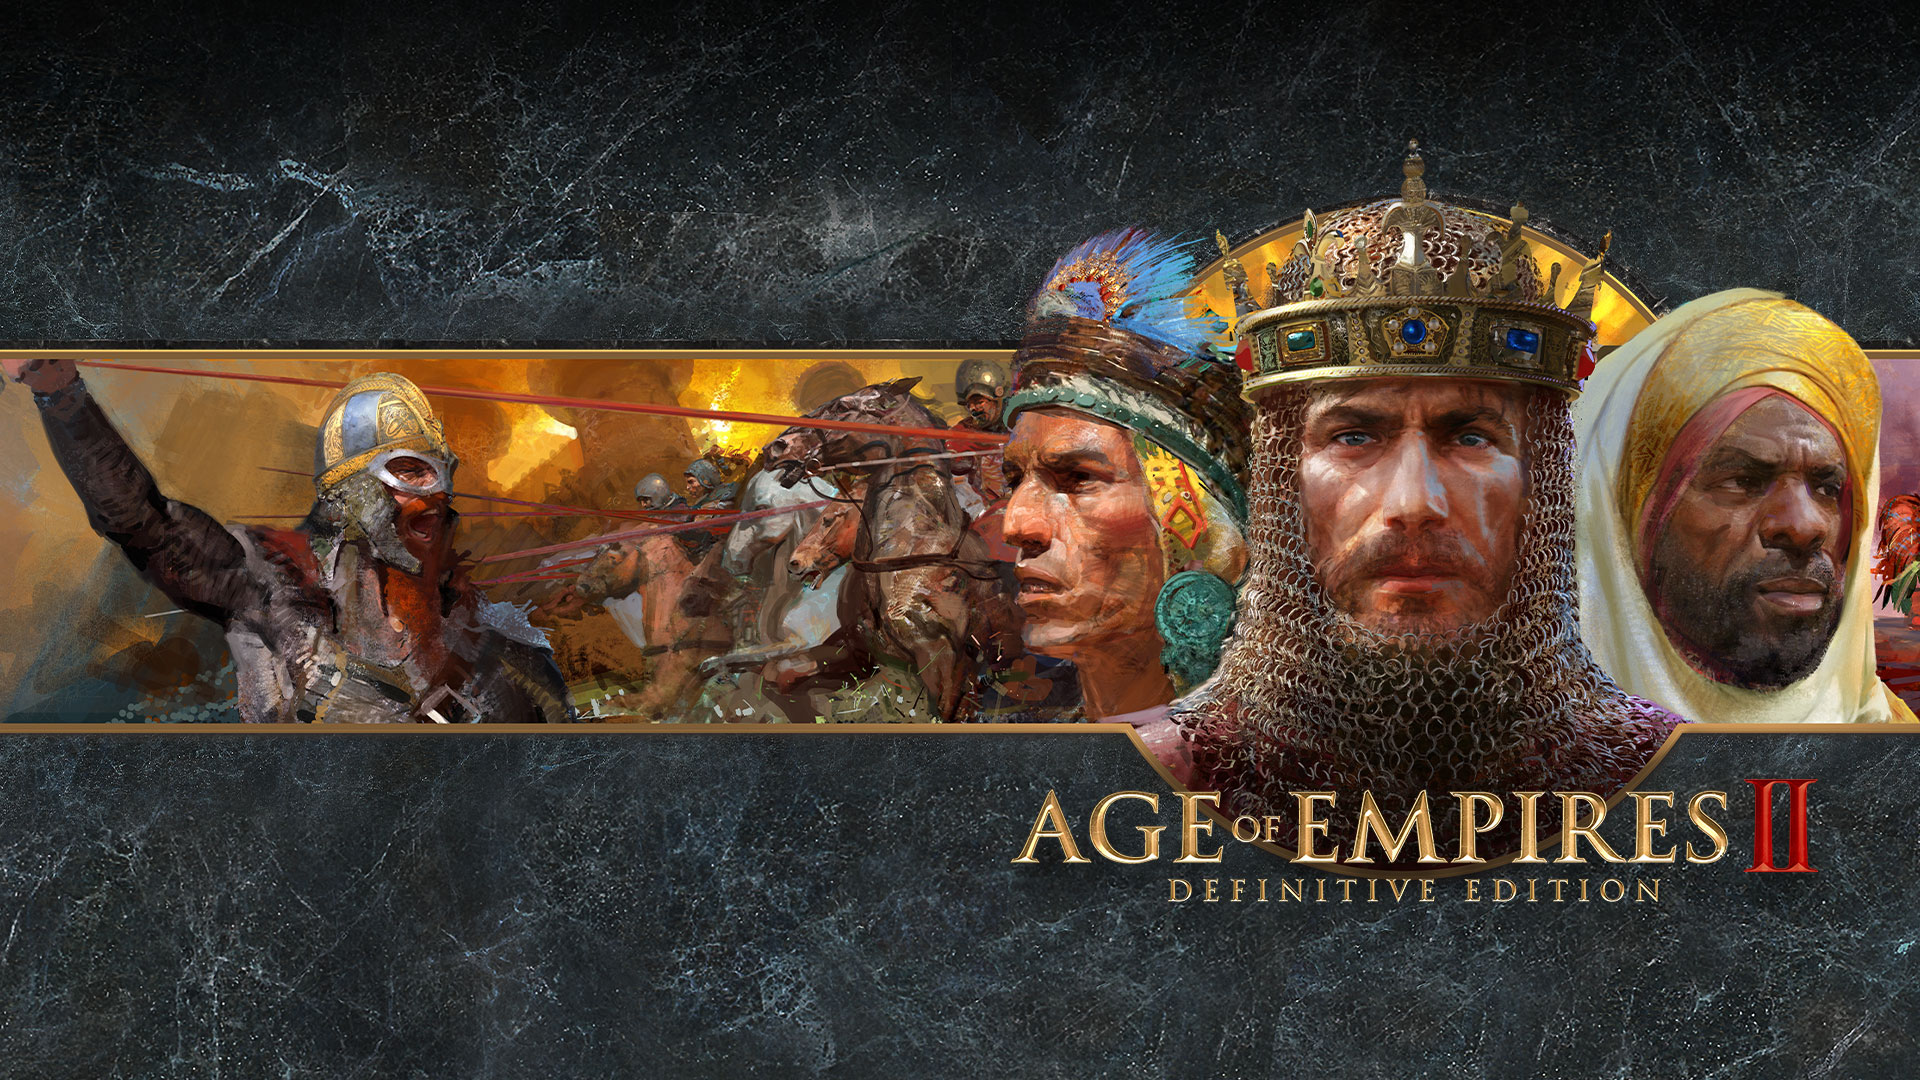 Age of Empires II: Definitive Edition feels great on Xbox consoles